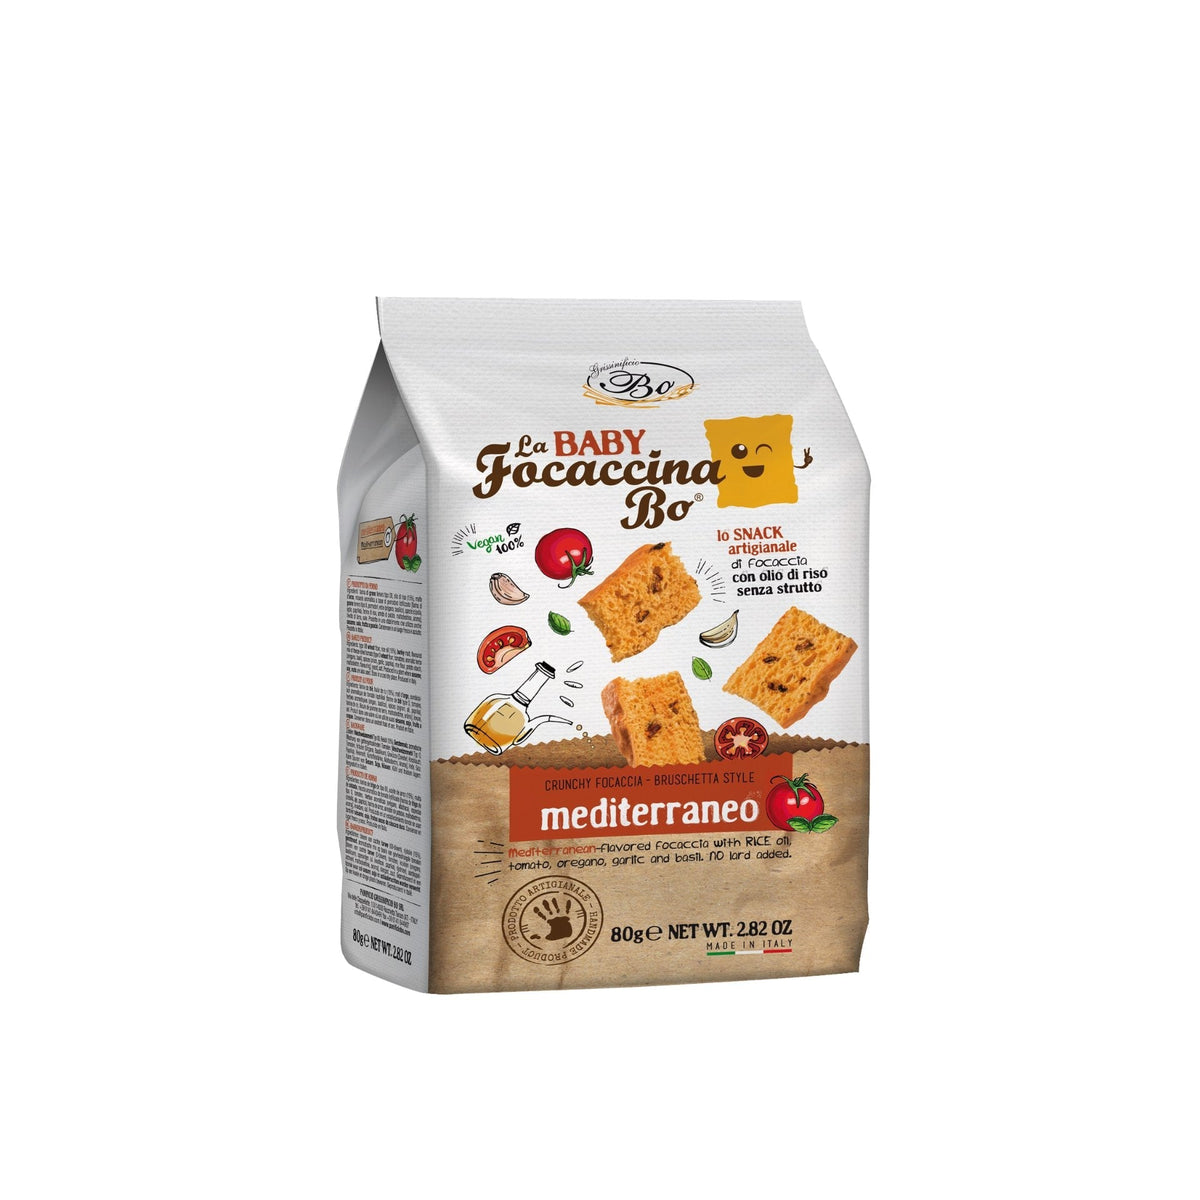 Grissinificio Bo Mediterranean Baby Focaccina 80g  | Imported and distributed in the UK by Just Gourmet Foods